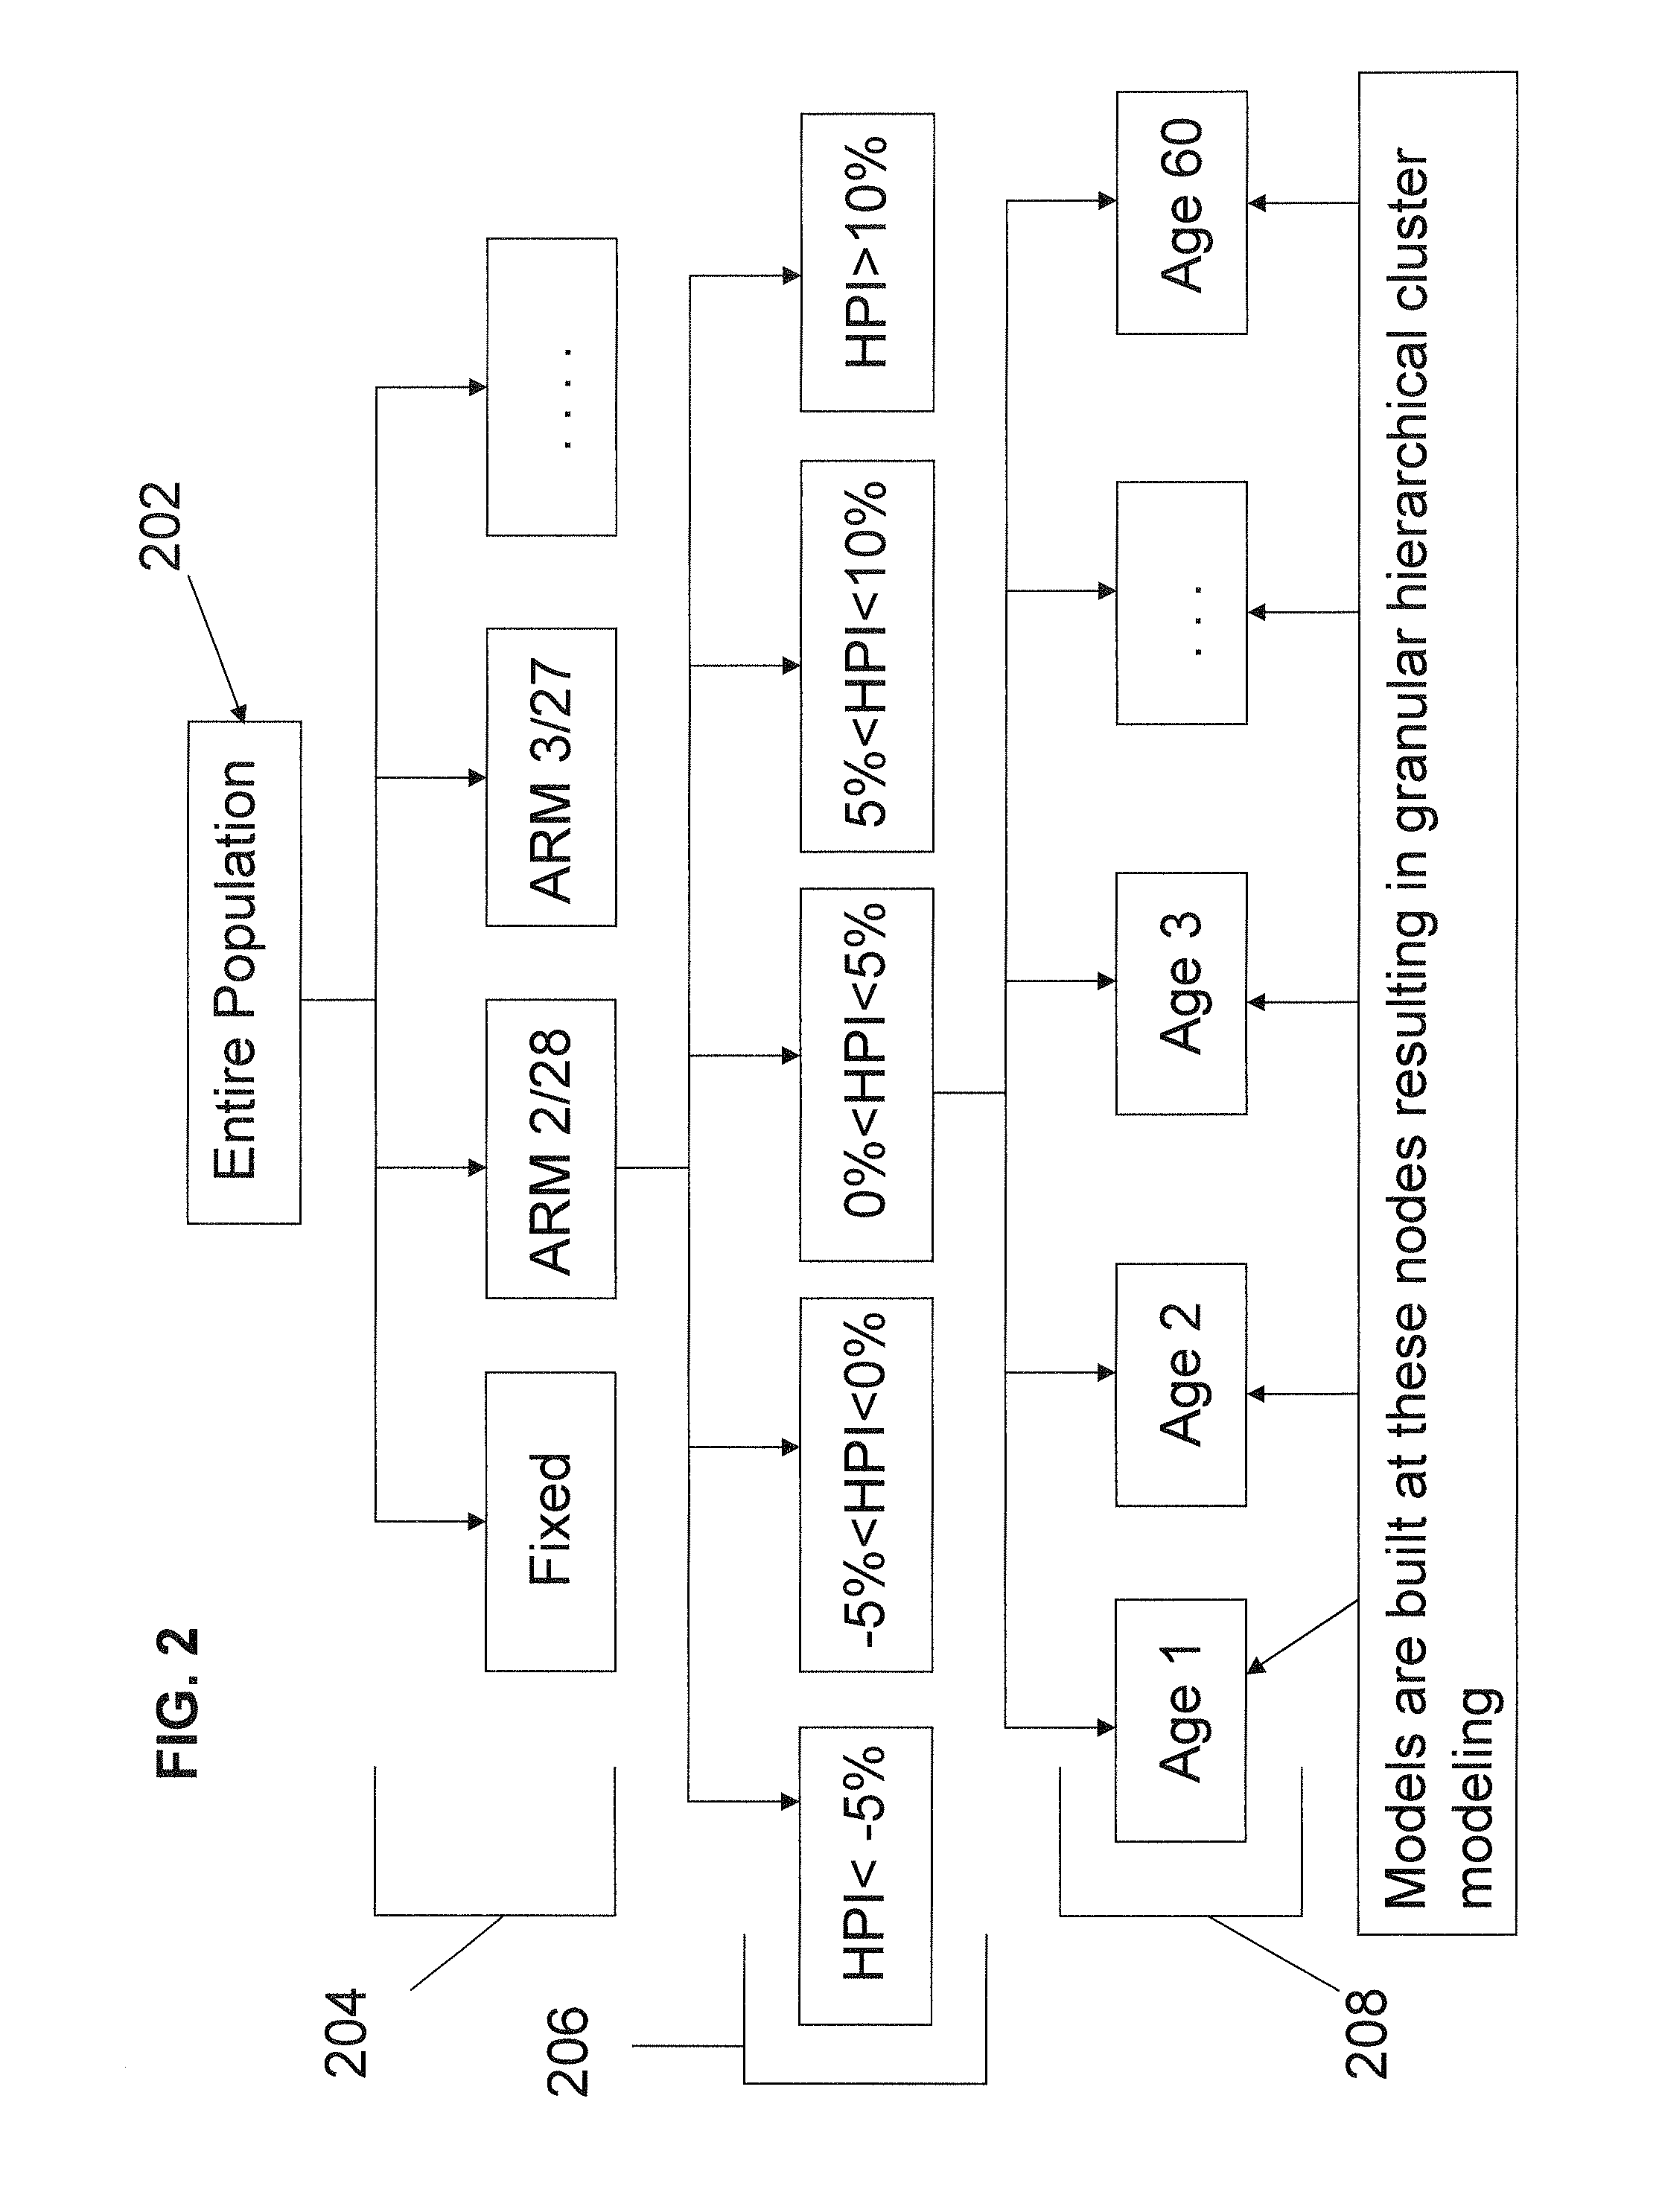 Apparatus and method for modeling loan attributes